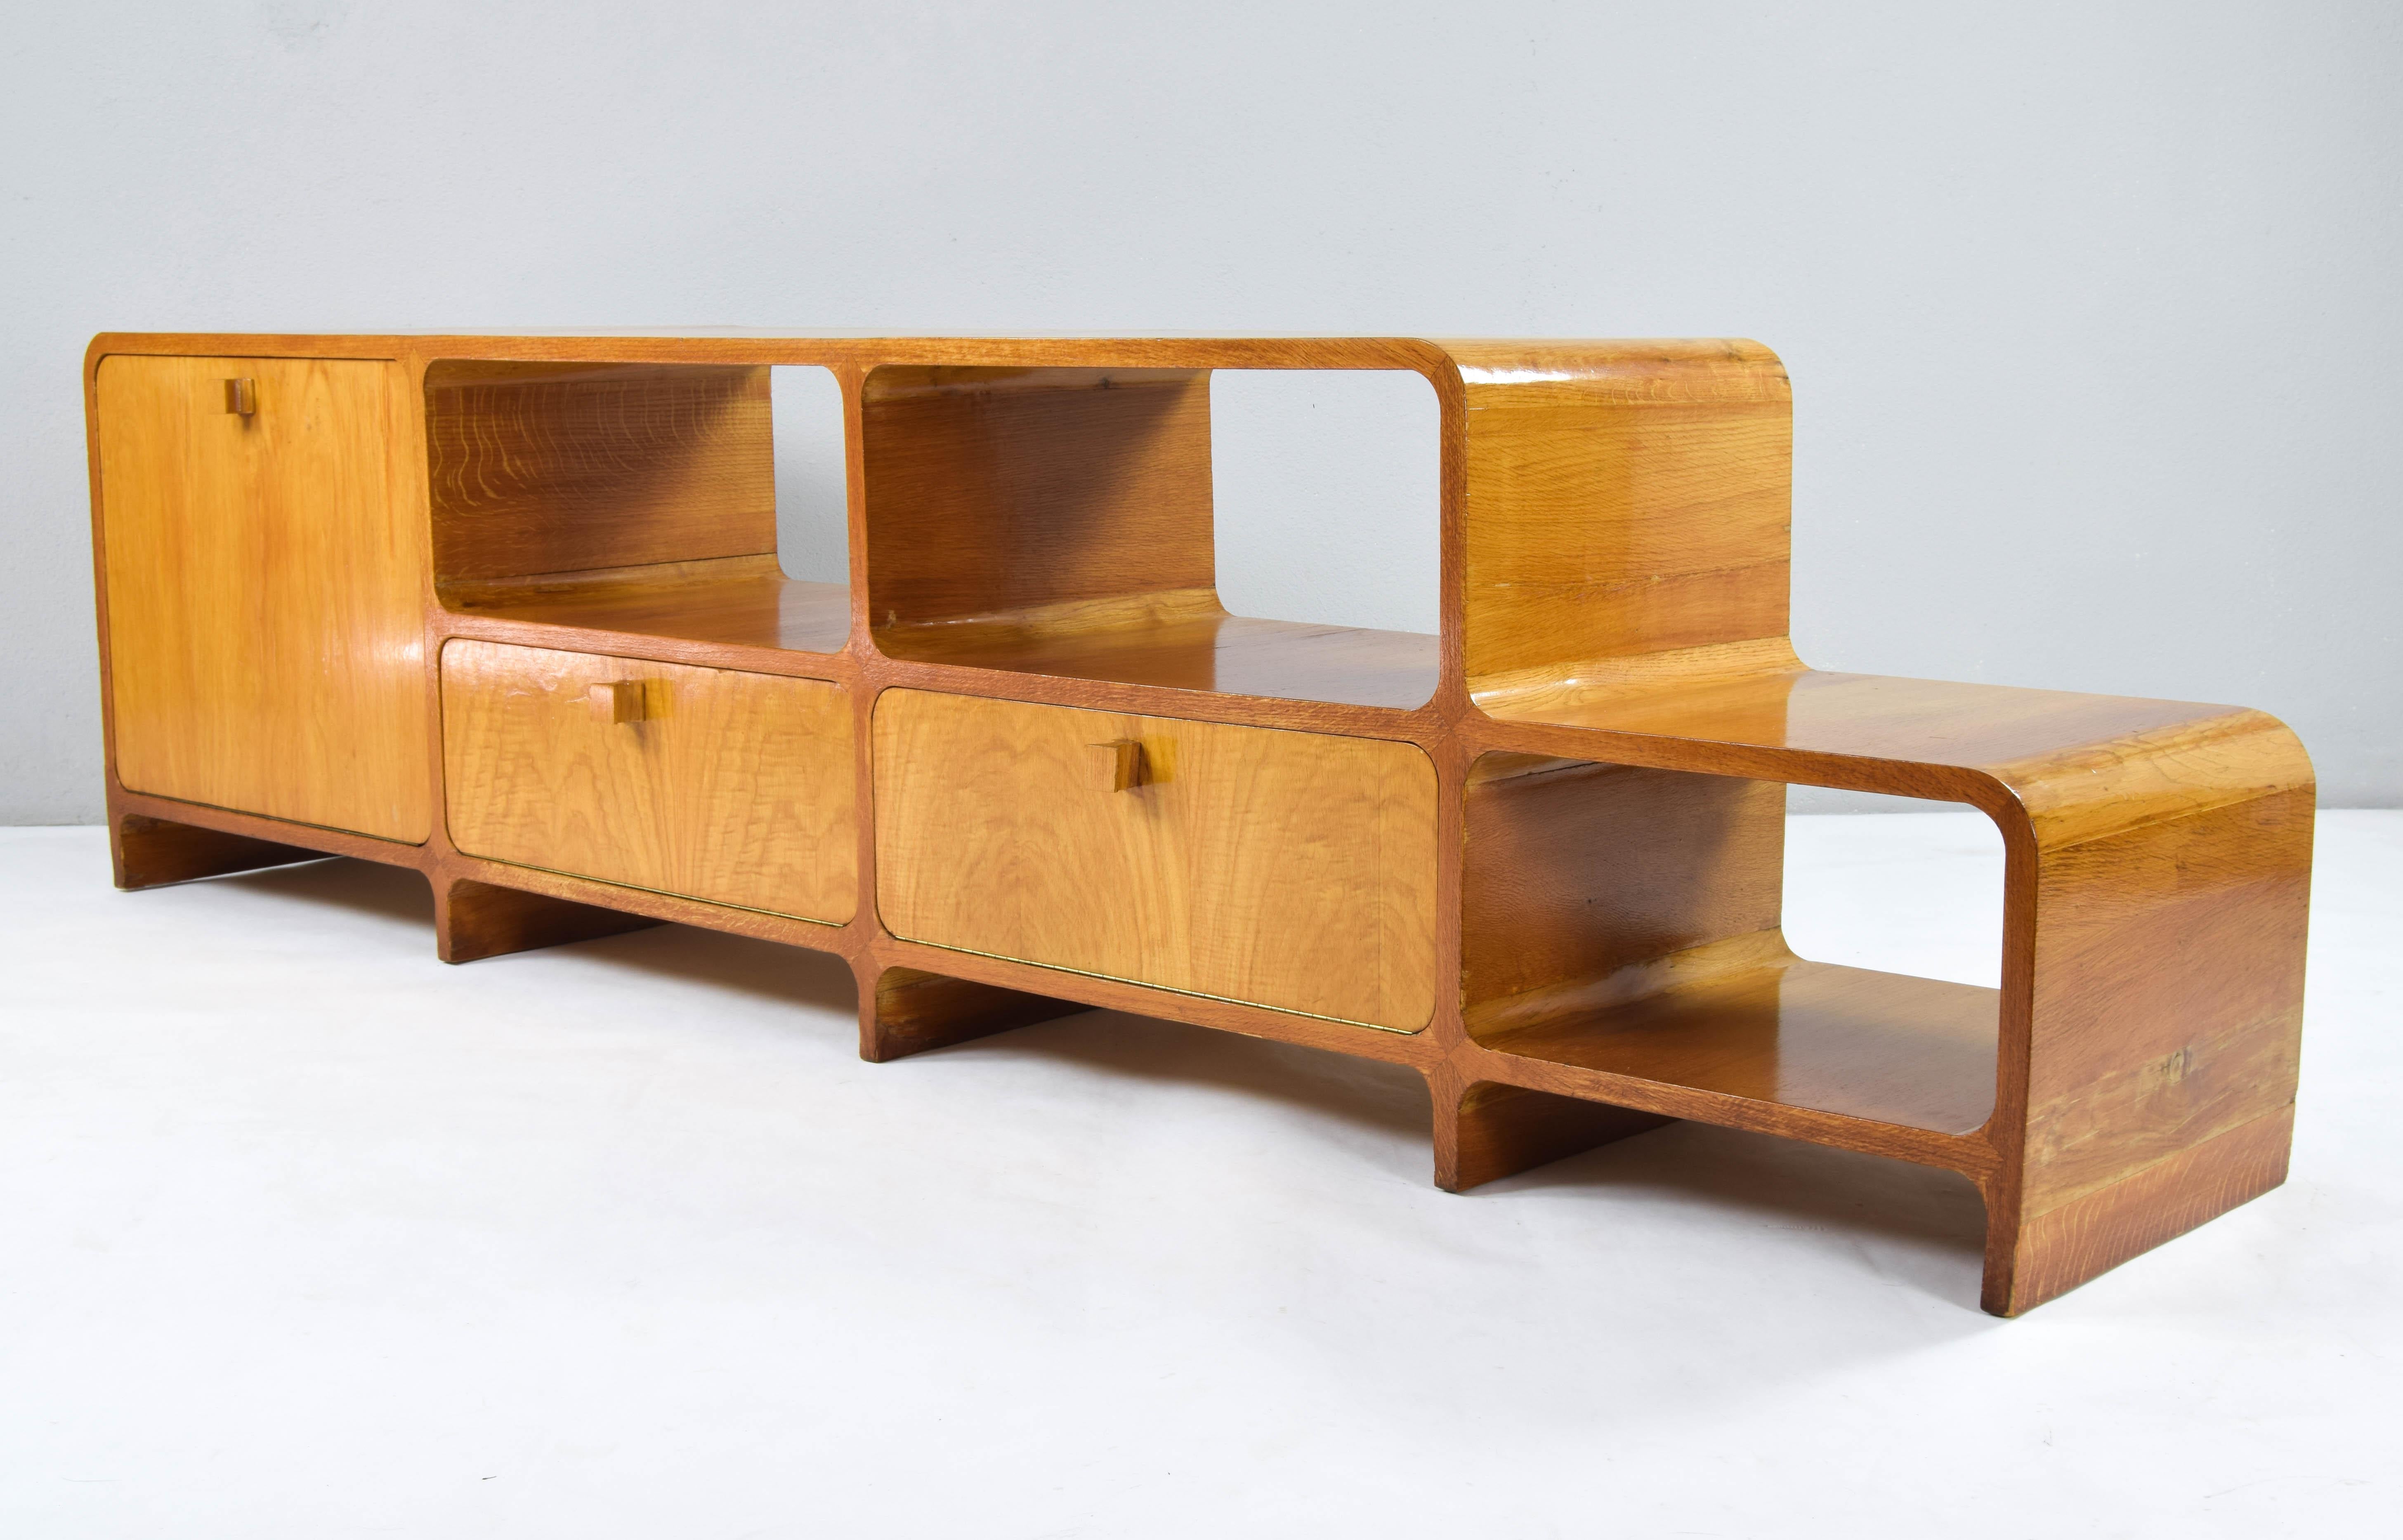 Bauhaus Large Curved Midcentury Danish Modern Teak Double Sided Space Divider Sideboard